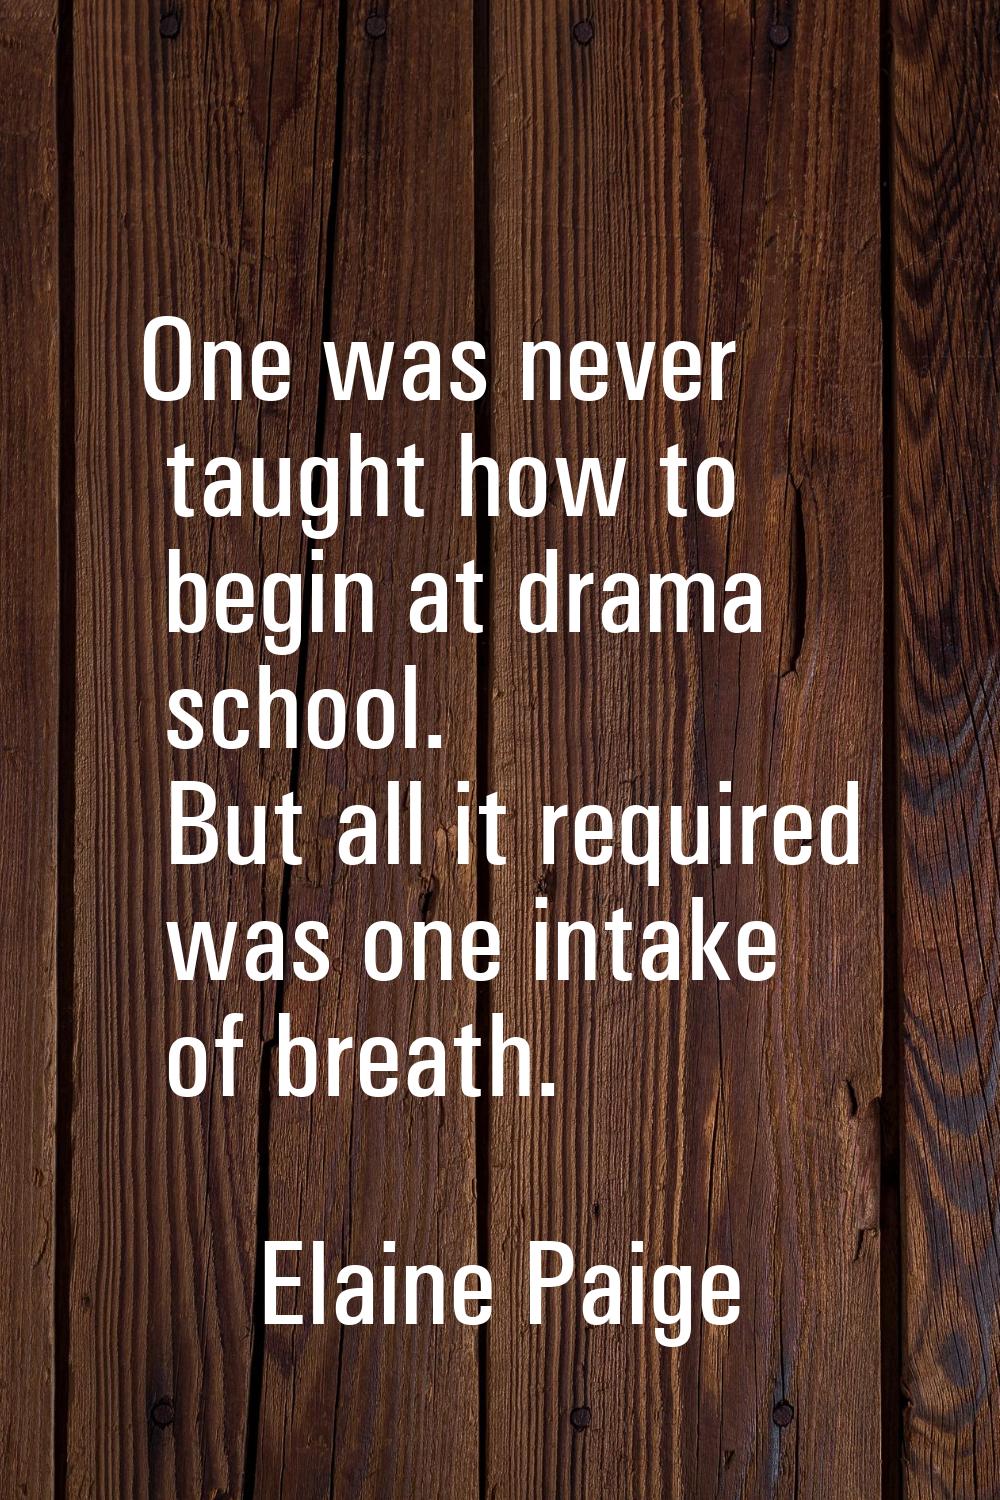 One was never taught how to begin at drama school. But all it required was one intake of breath.